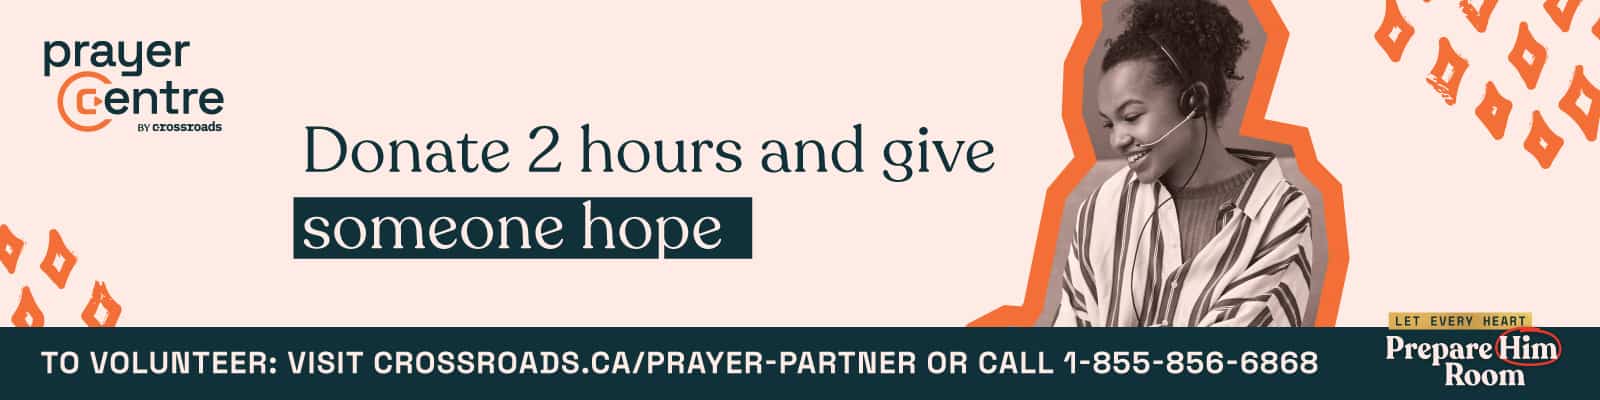 Do you have 2 hours to give? Volunteer with the Crossroads Prayer centre